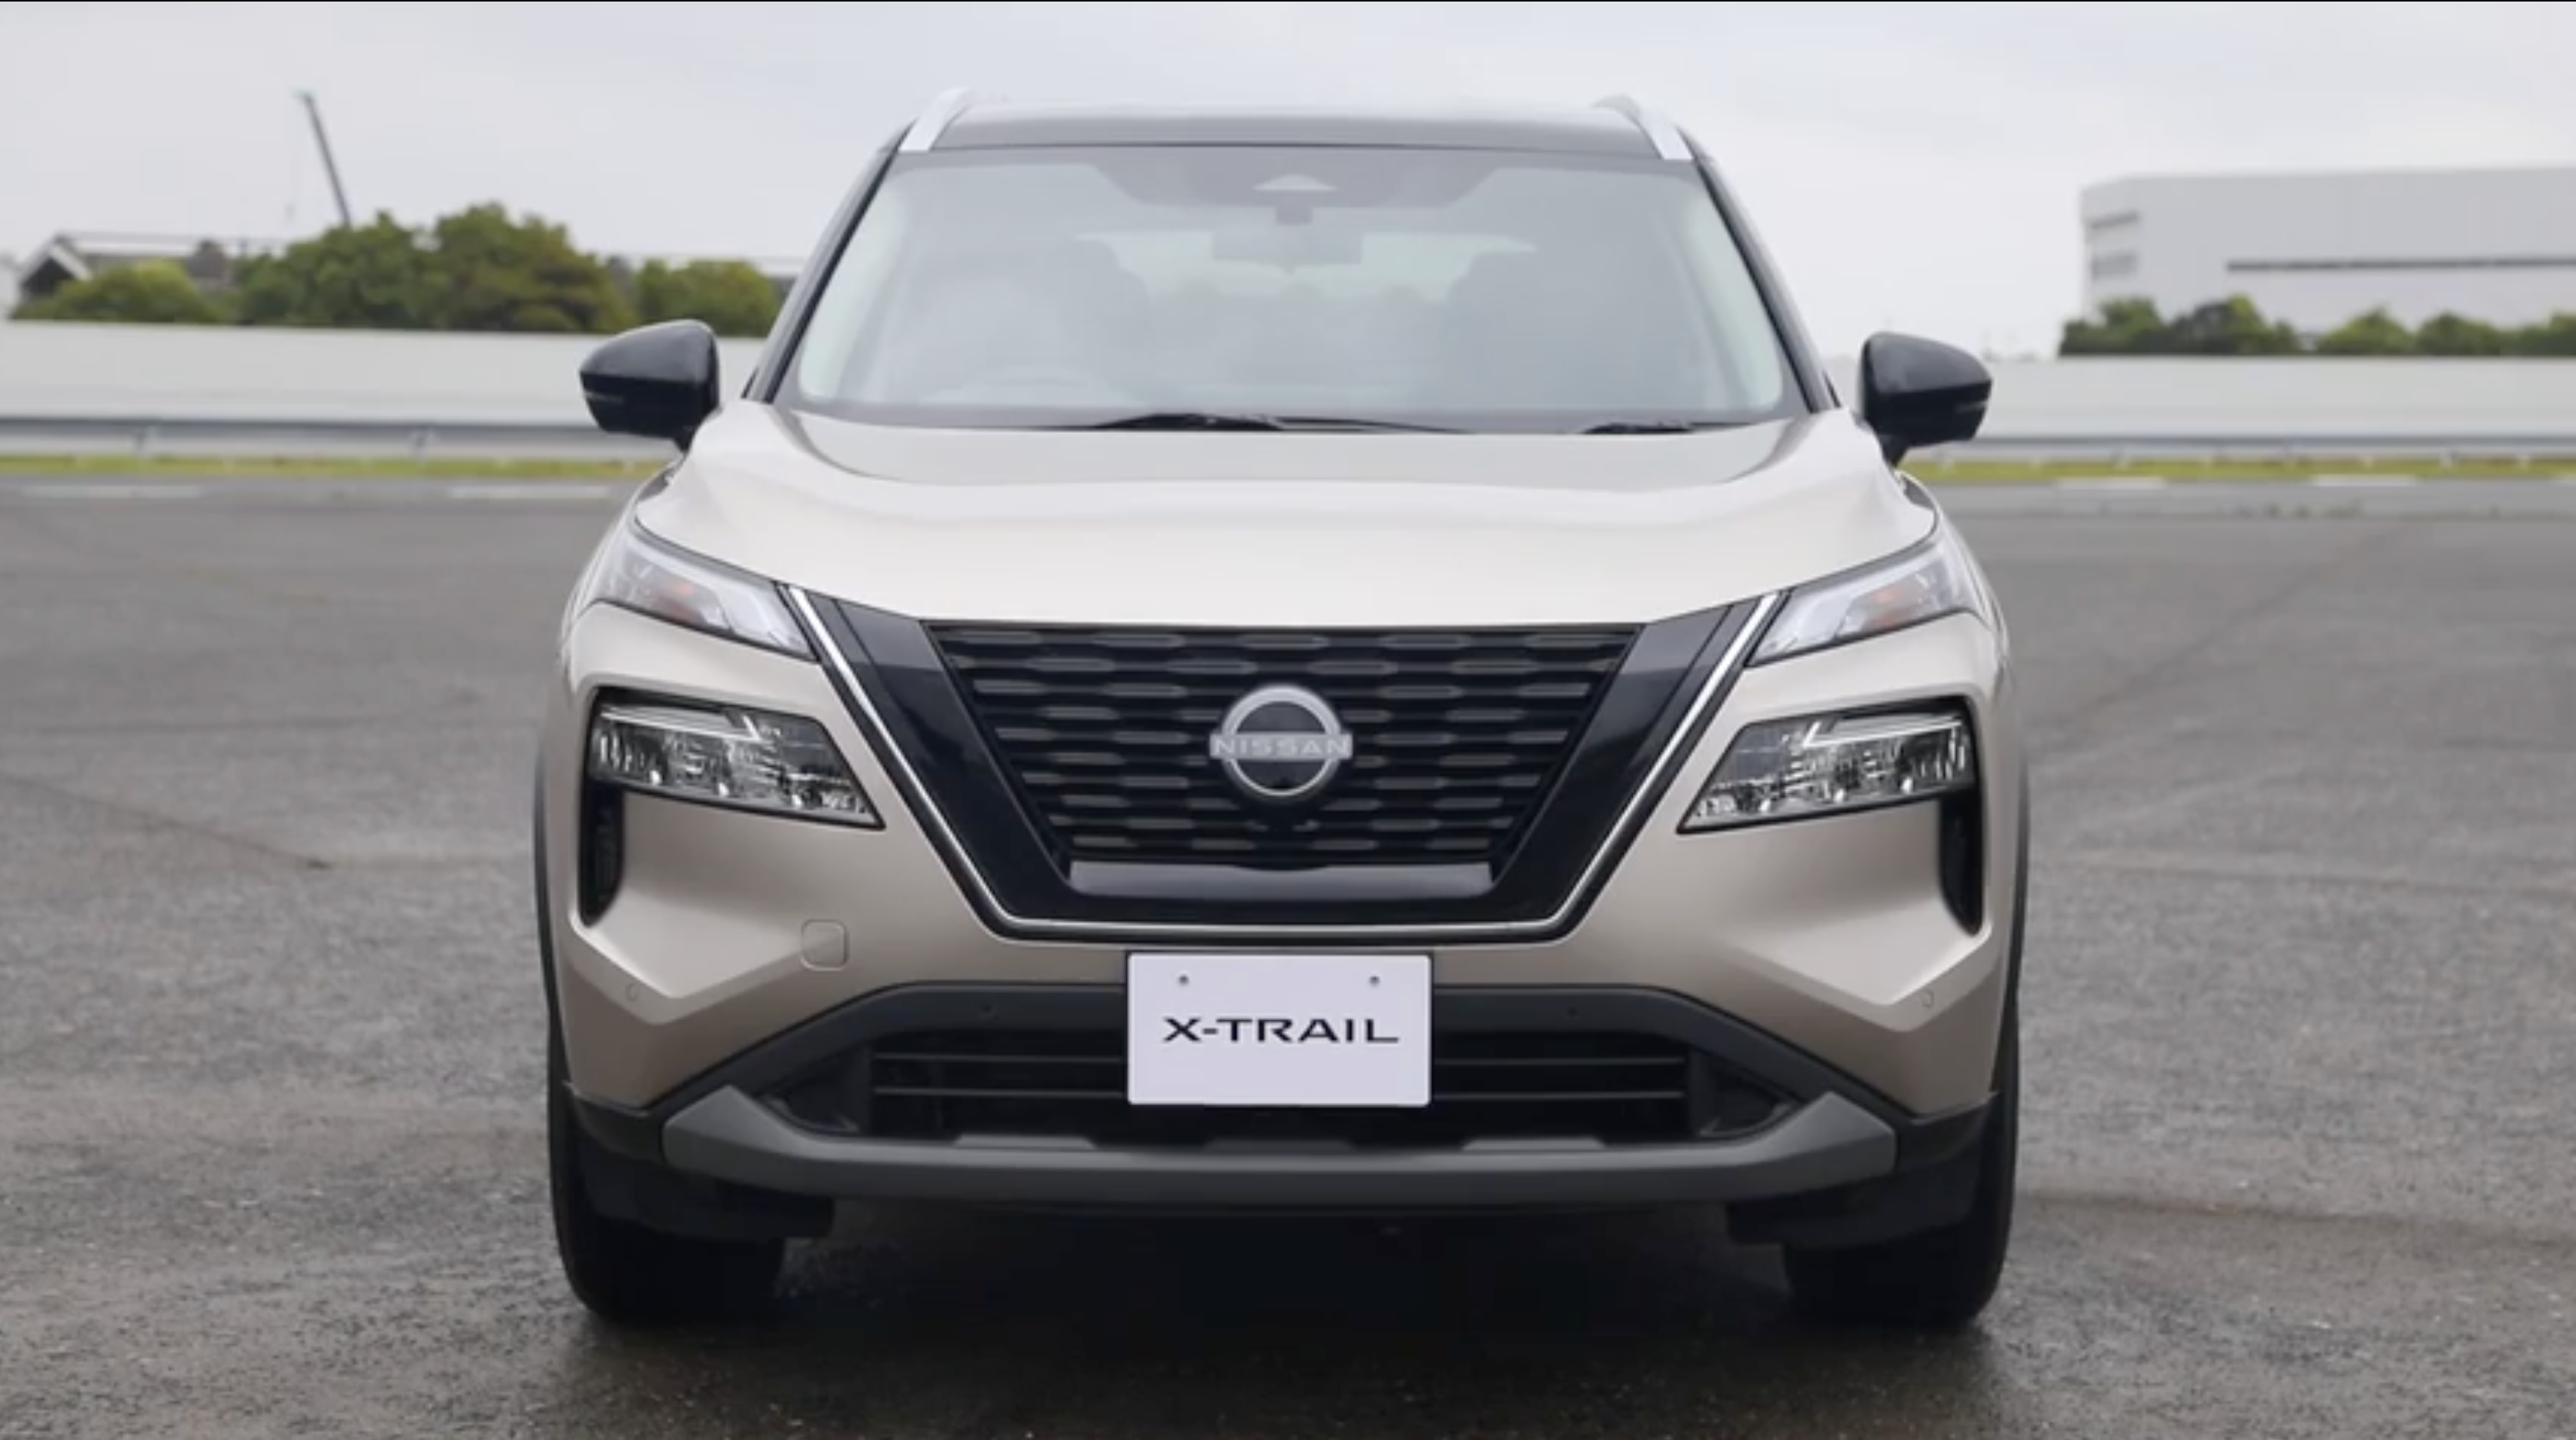 Nissan Announces All-New Second Generation X-TRAIL SUV